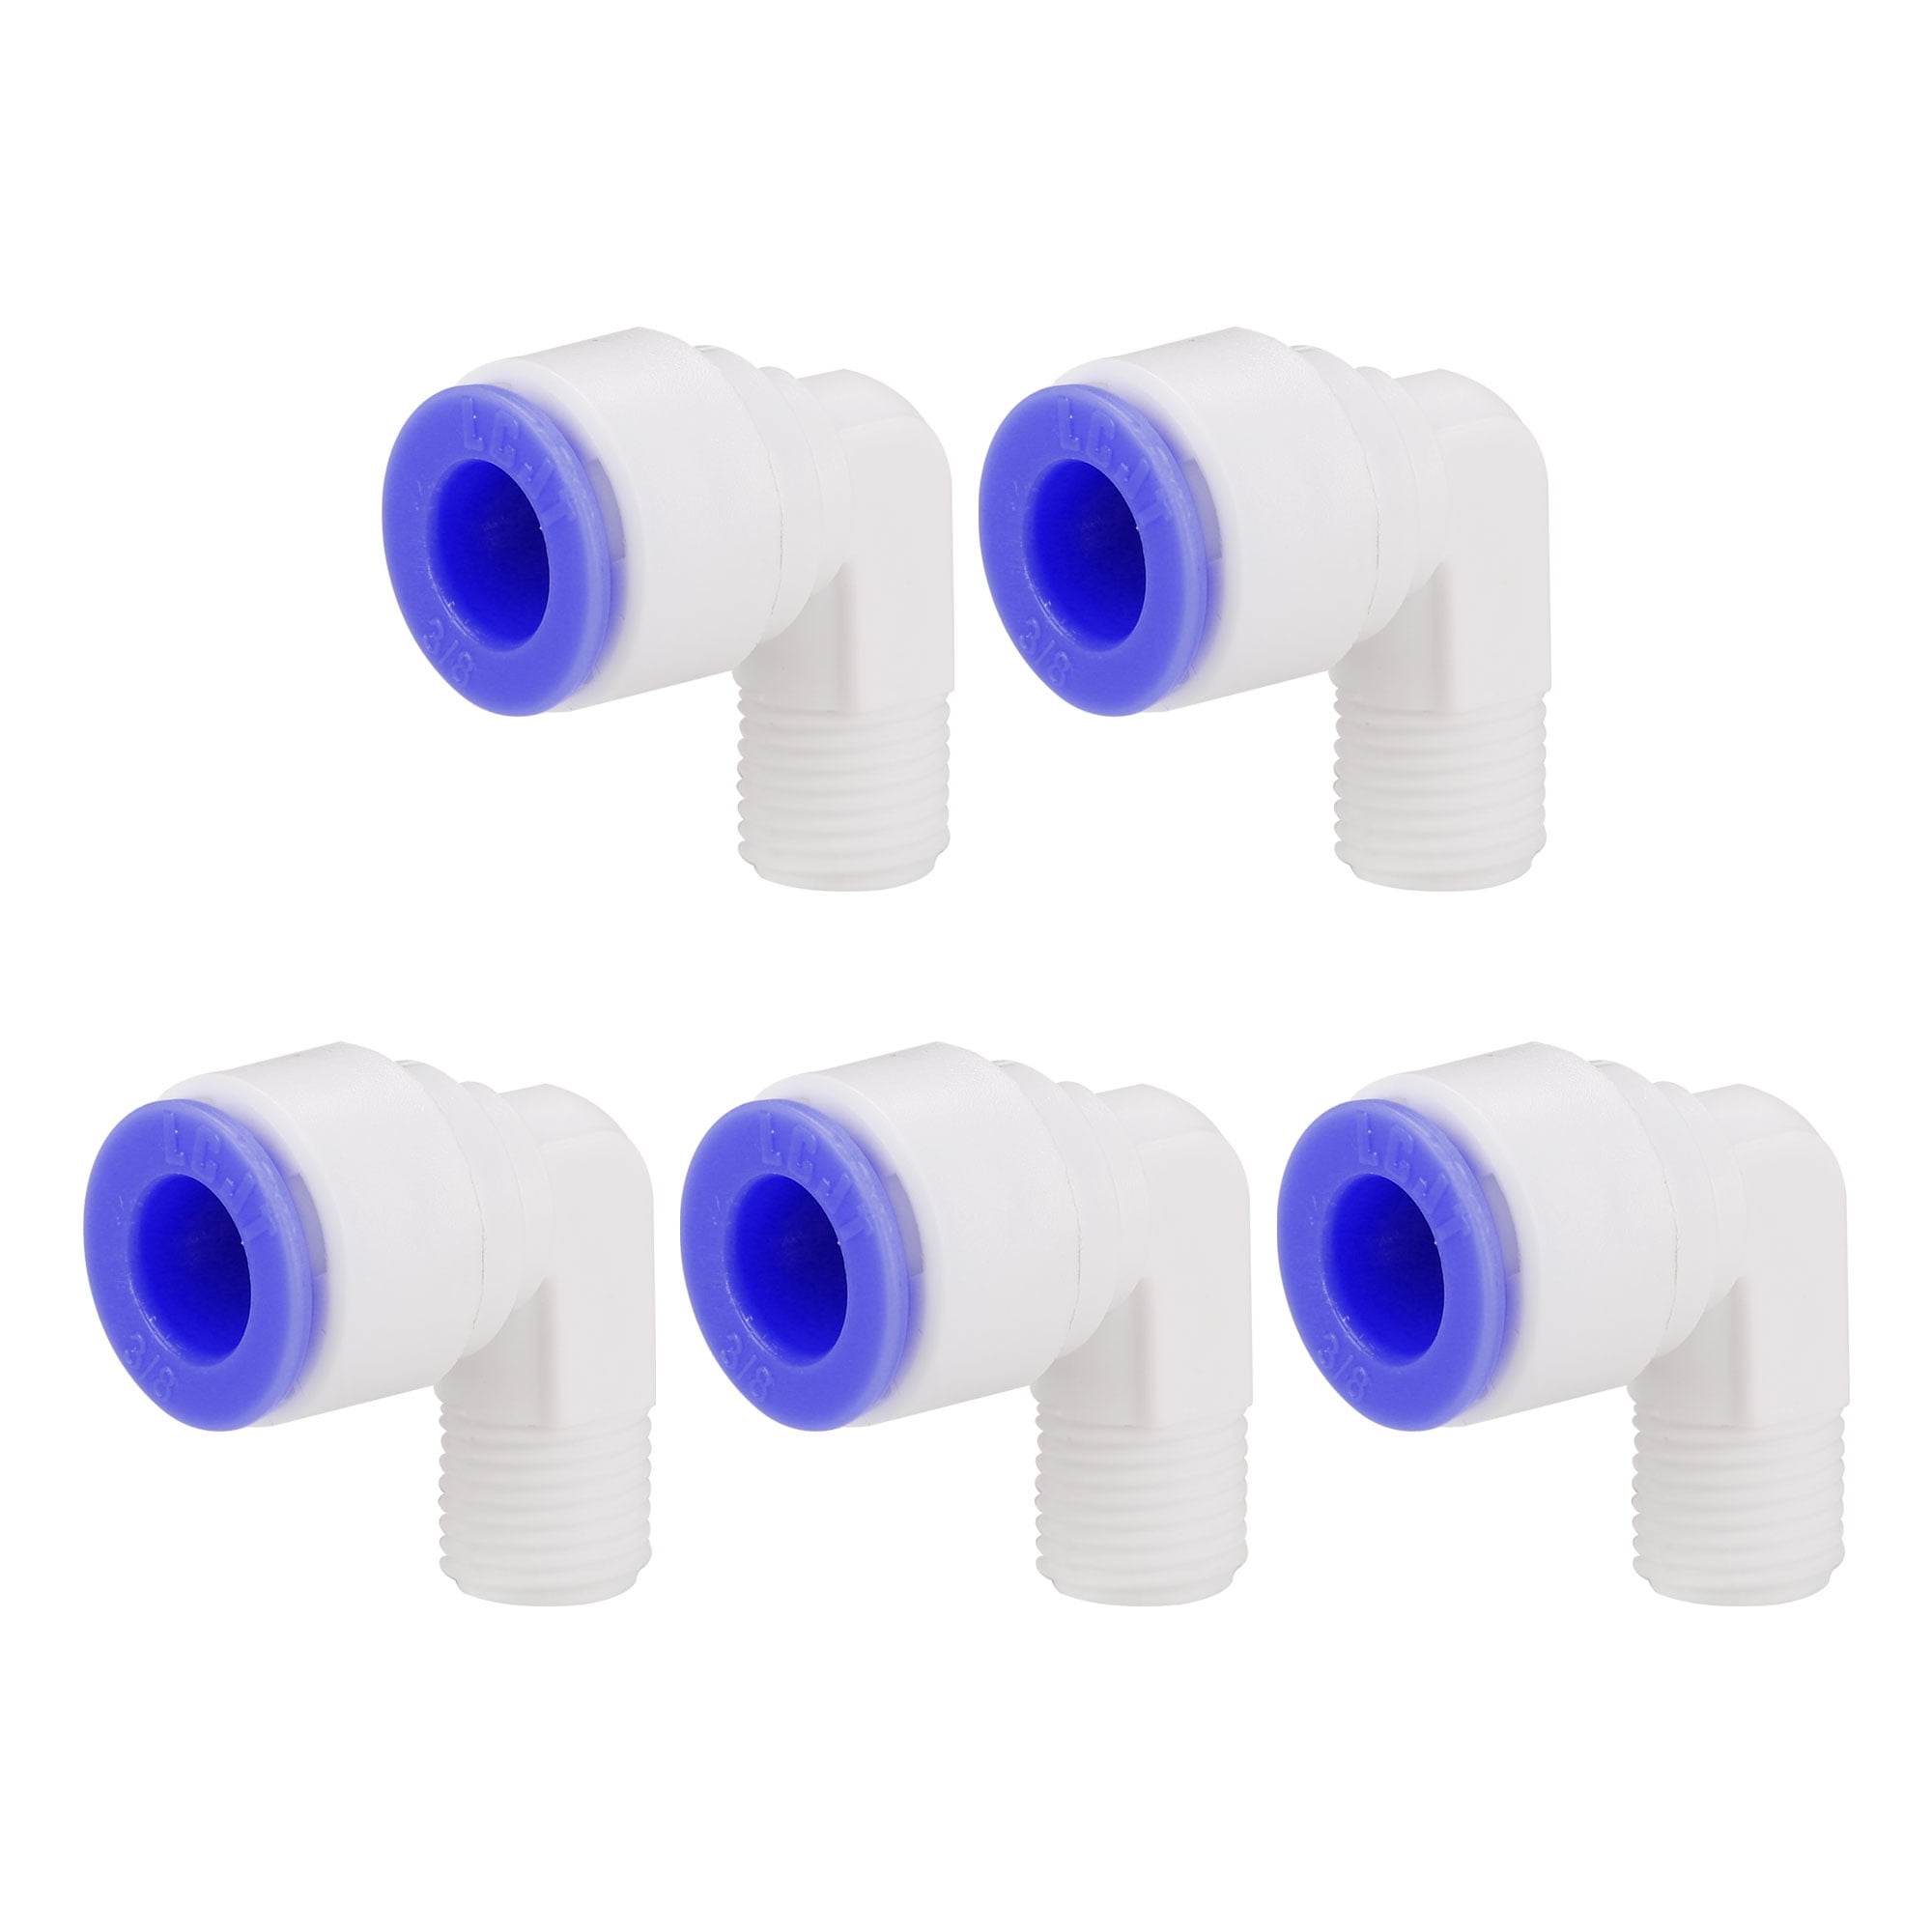 3/8" Home Garden Water Hose Pipe Tap Connector Tube Fitting Adaptor Kit 